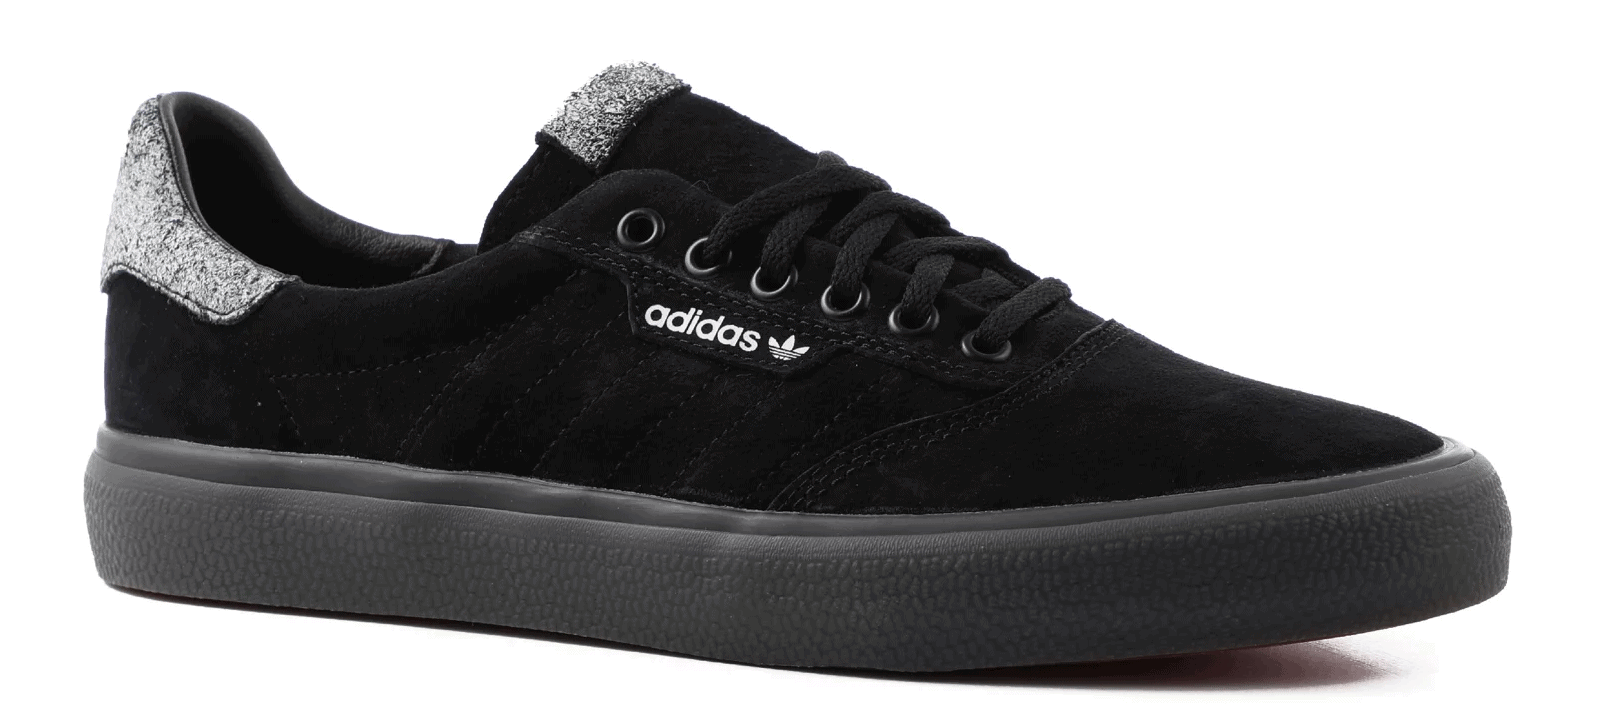 The New Classic - Adidas 3MC - The Boardstore Blog